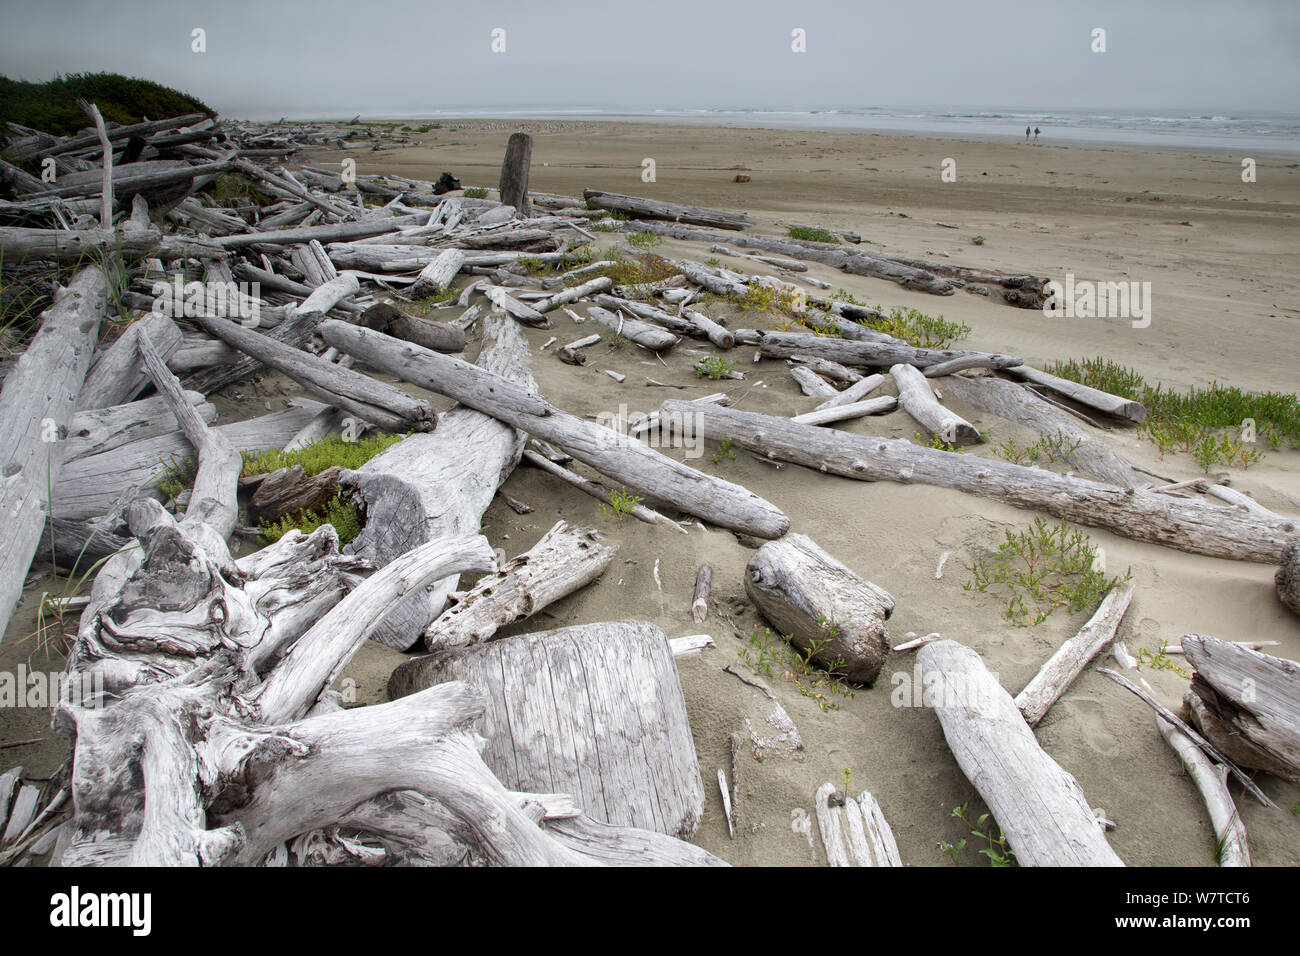 Driftwood washed up on sandy beach on a misty day. Wickaninnish Beach, Vancouver Island, British Columbia, Canada, August. Stock Photo